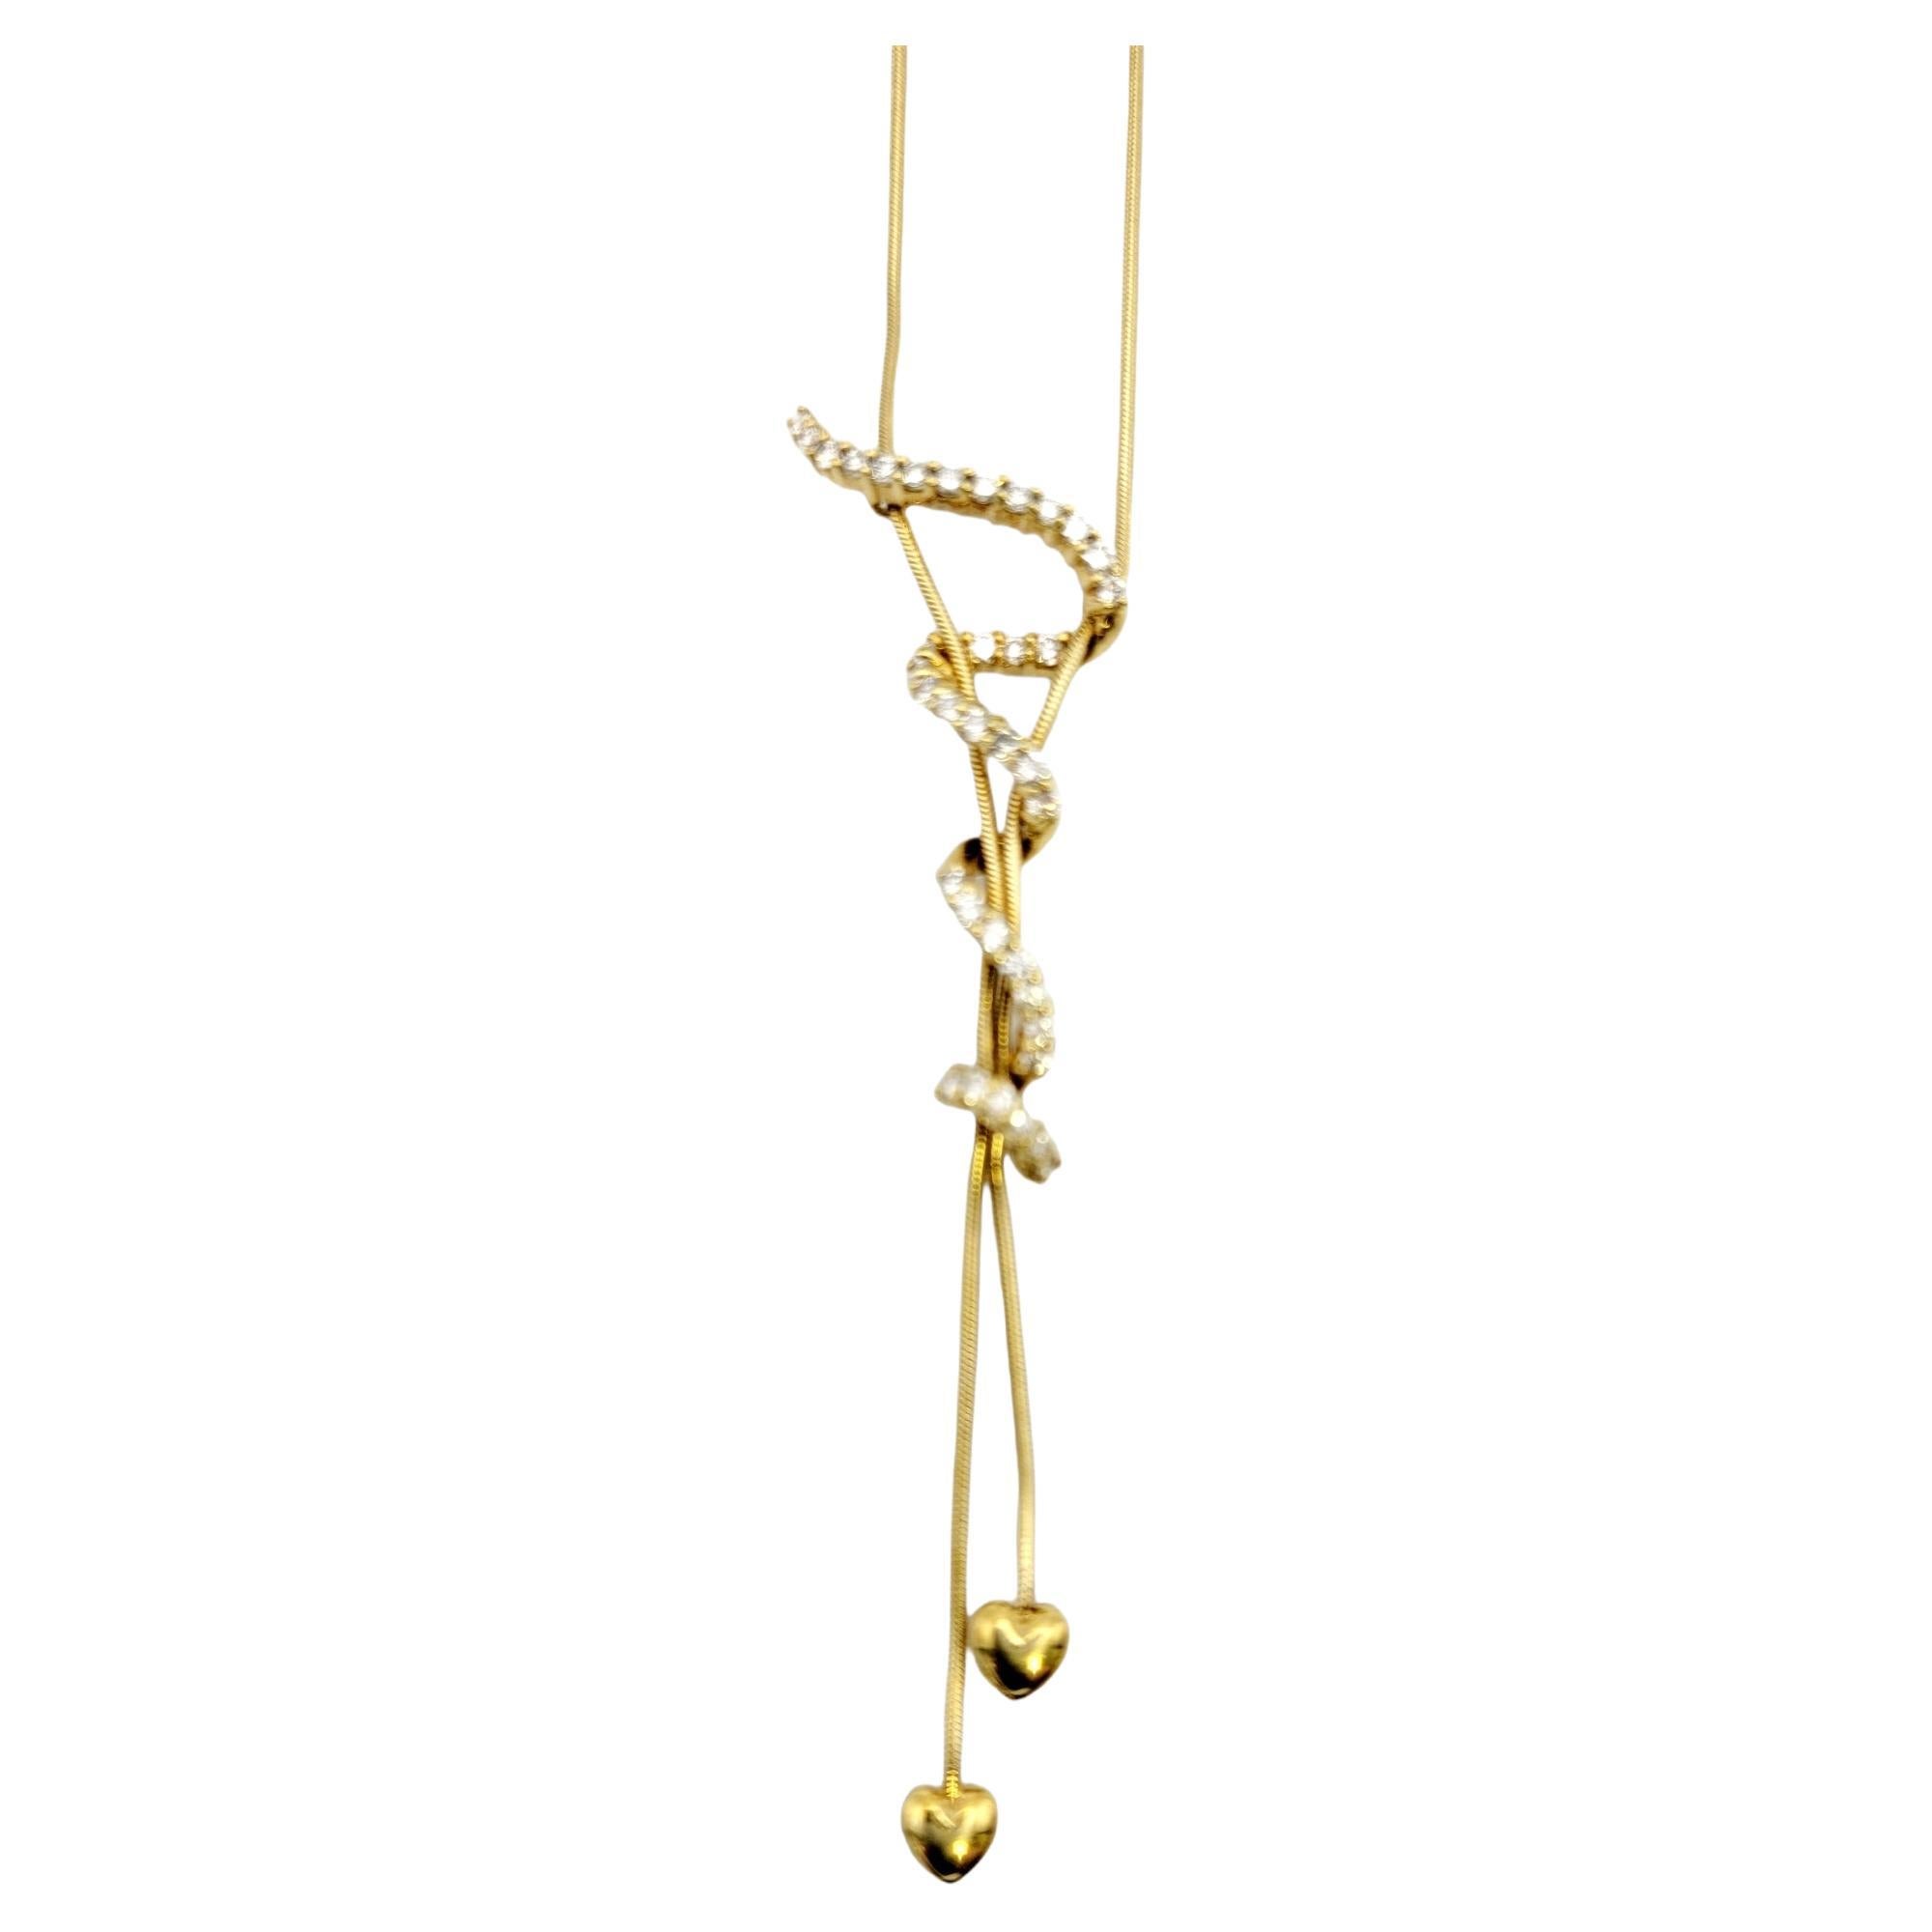 Jose Hess 18 Karat Yellow Gold Drop Necklace with Hearts and Diamond Squiggle